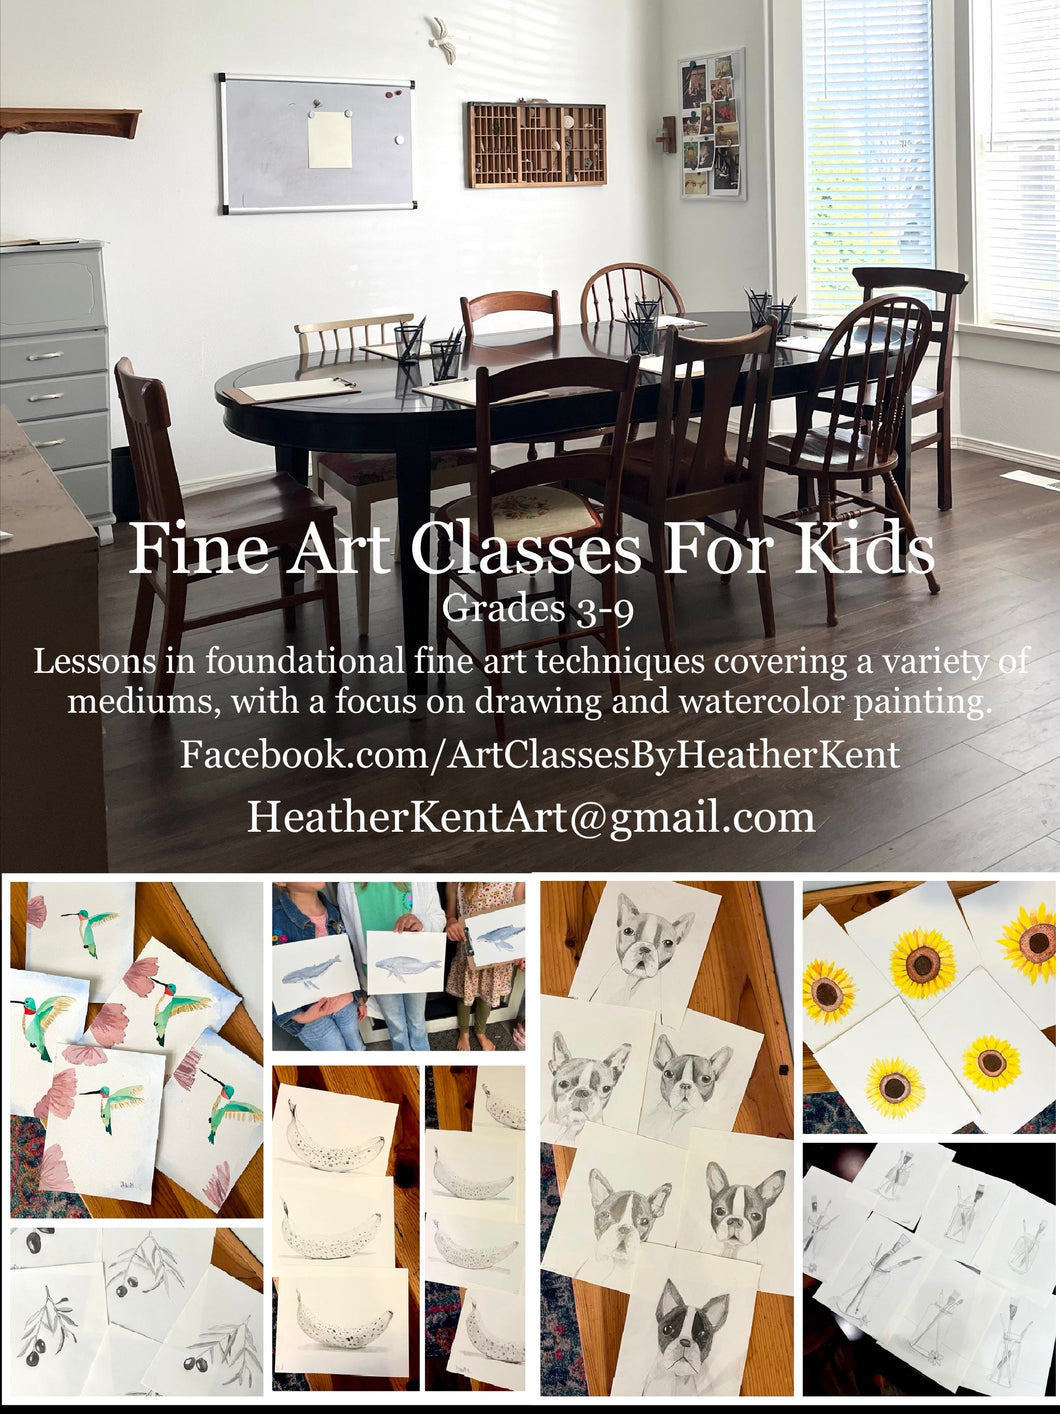 Wednesday, July 24th (10am-12pm) Art Class Workshop - Drawing